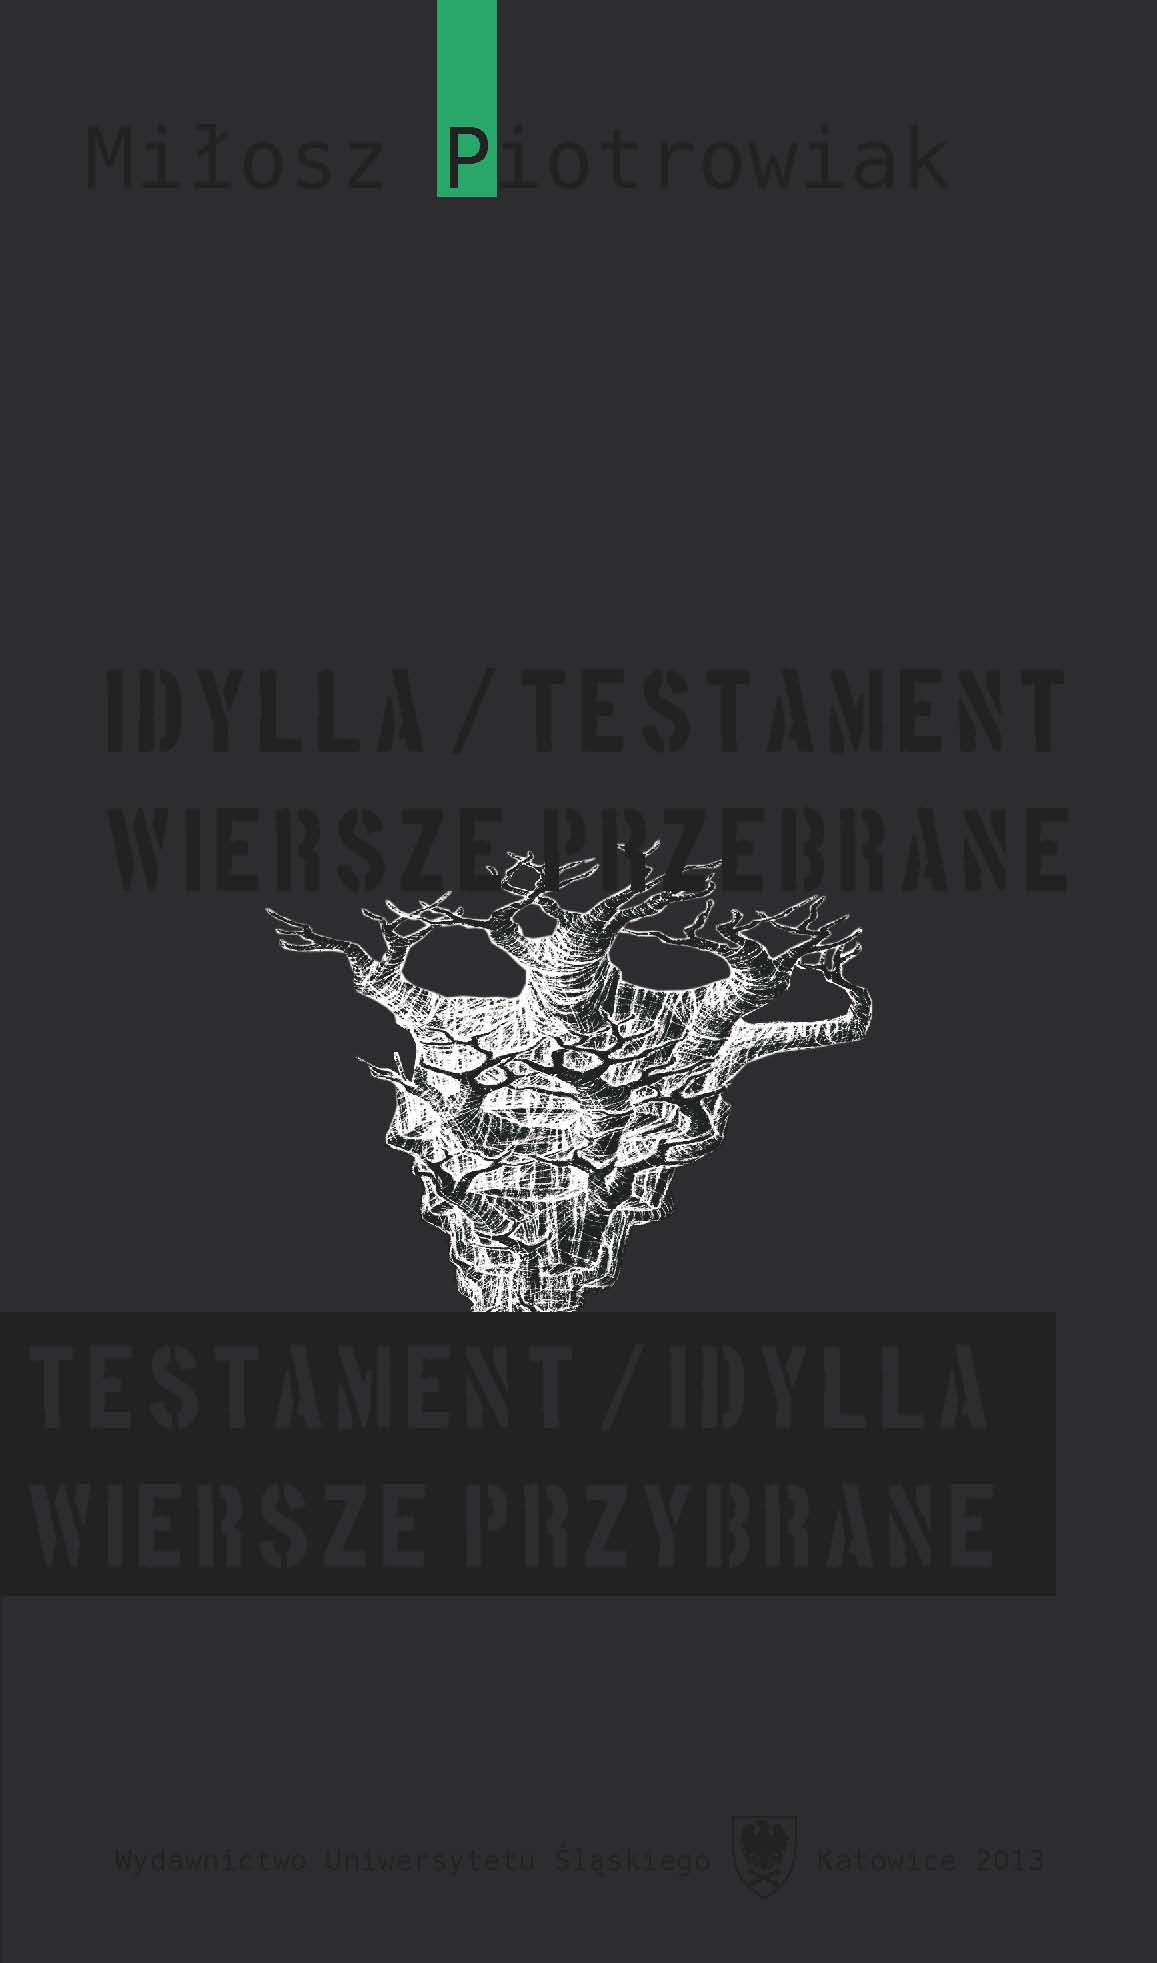 Idyll/testament. Selected poems Testament/idyll. Adopted poems